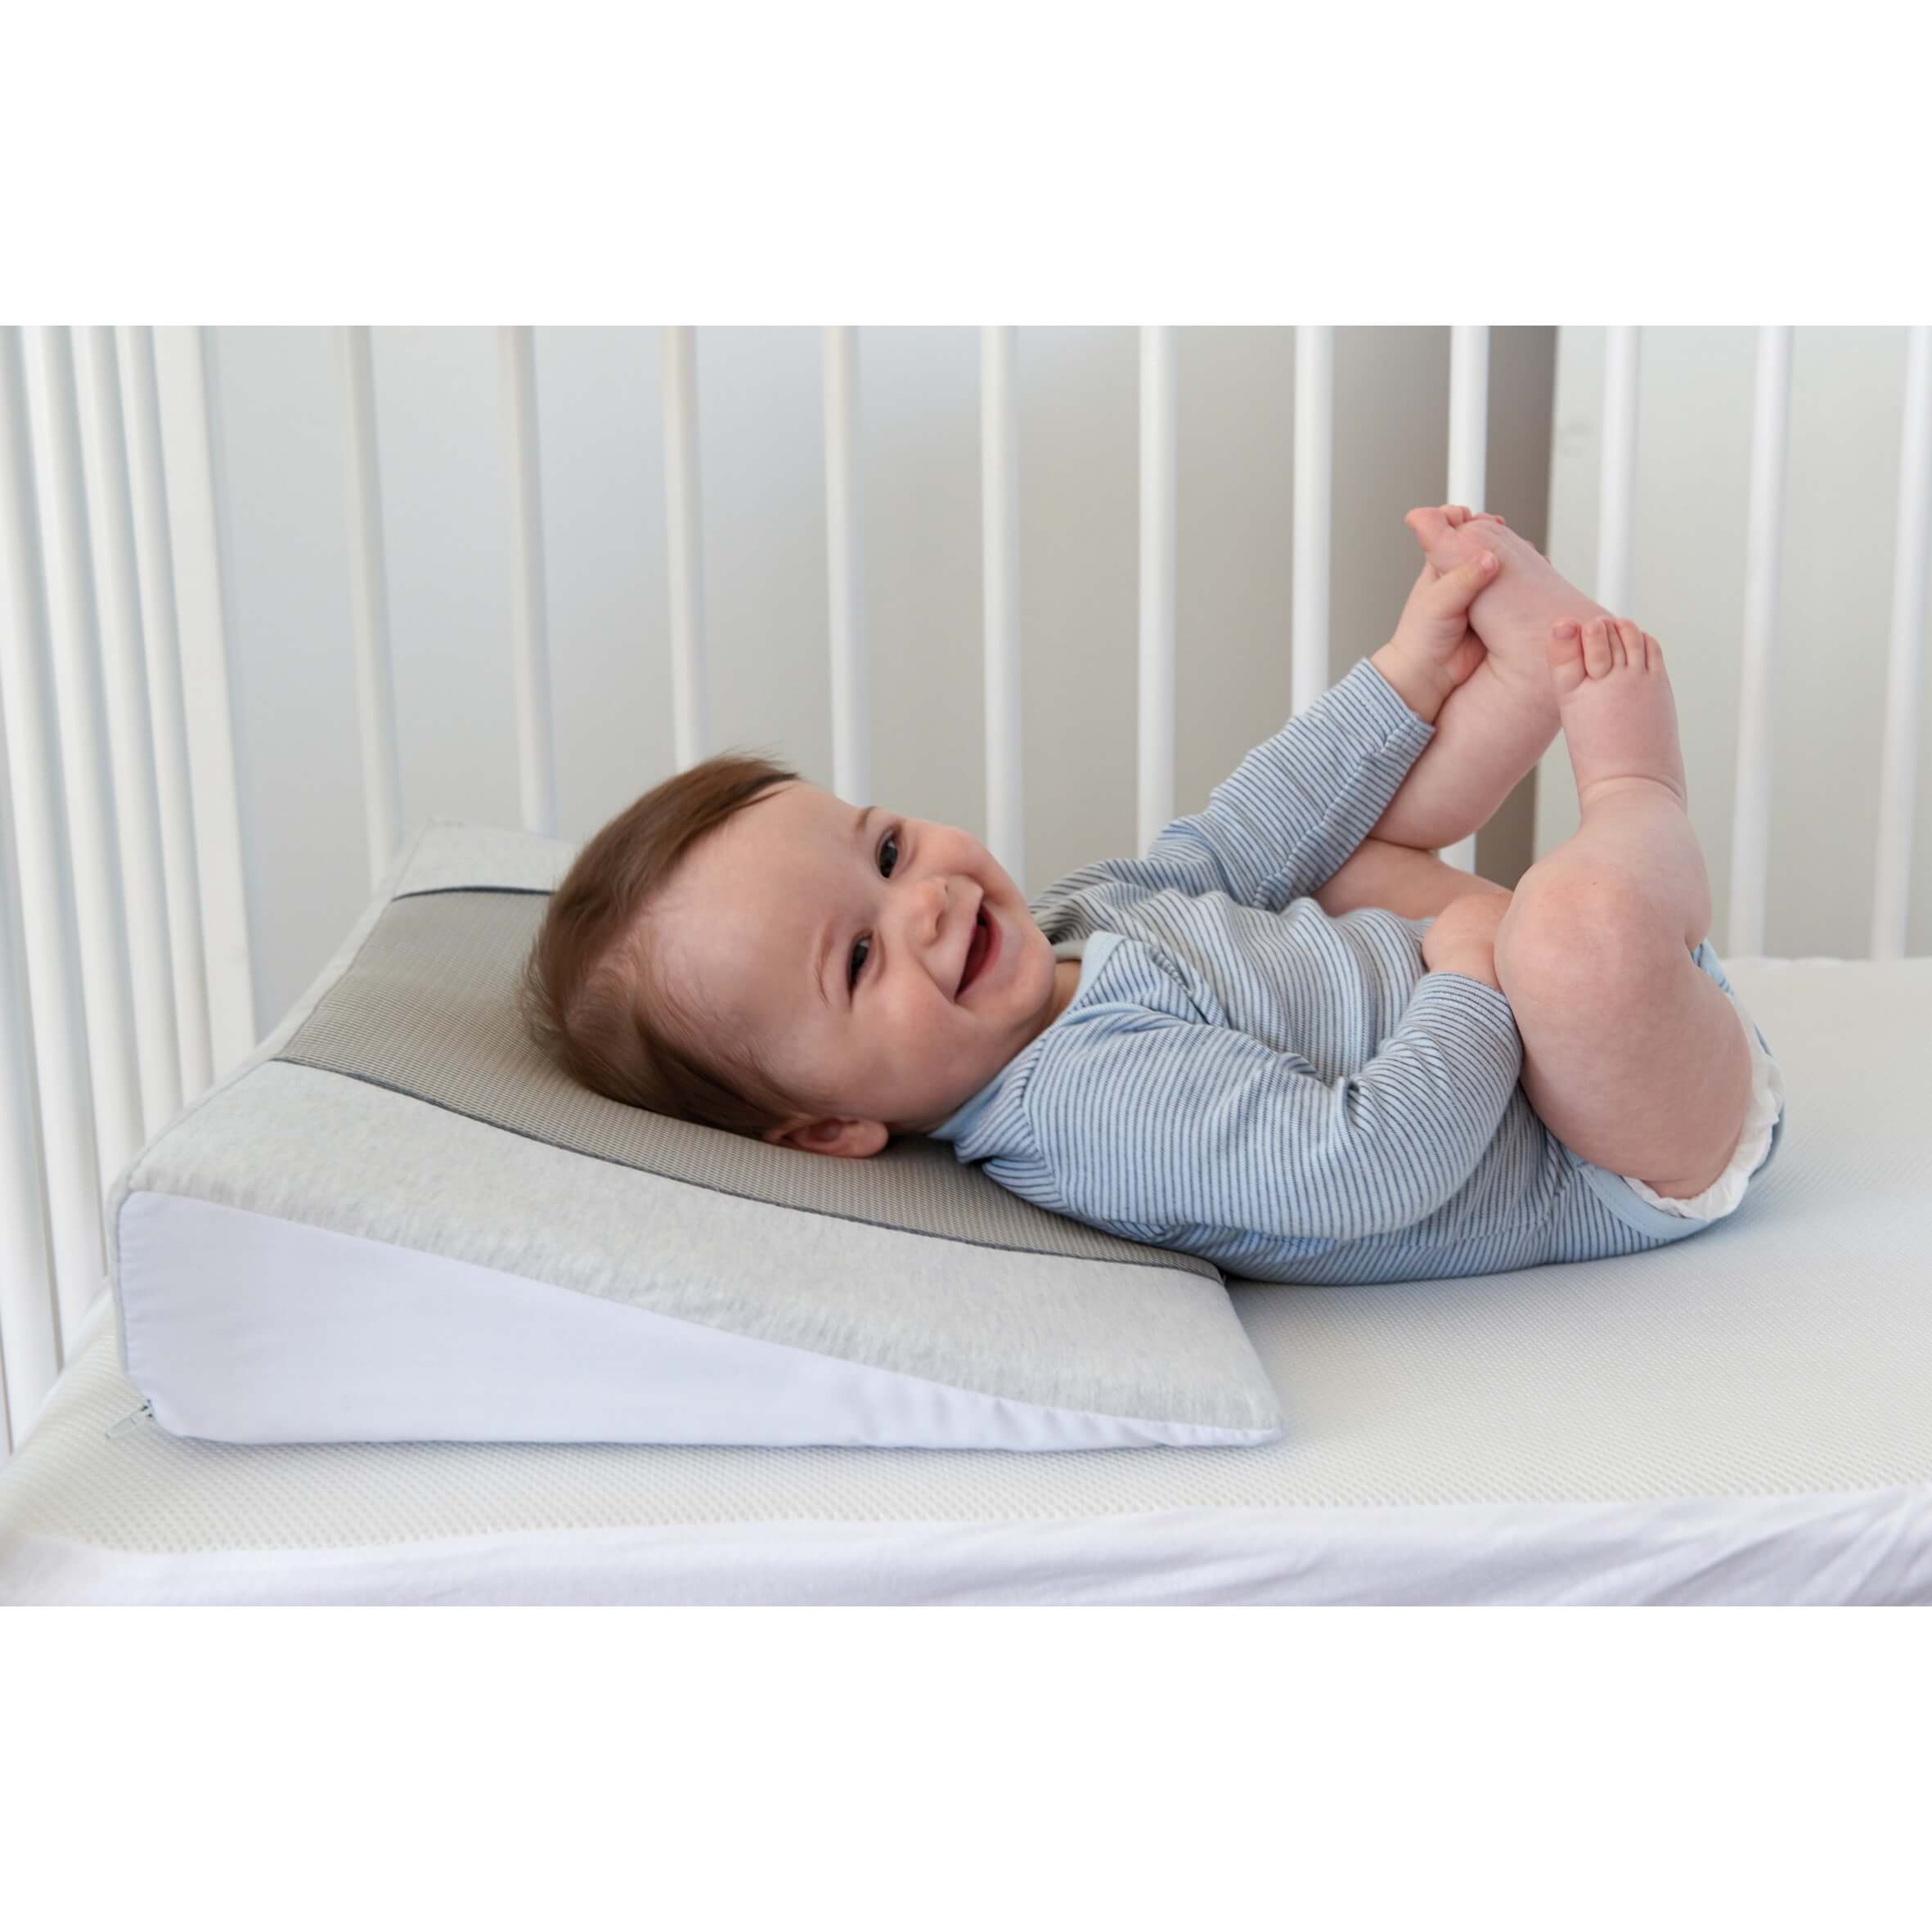 Candide Plan Incline Air Plus 15 Pour Lit 60x1 Cm Made In Bebe